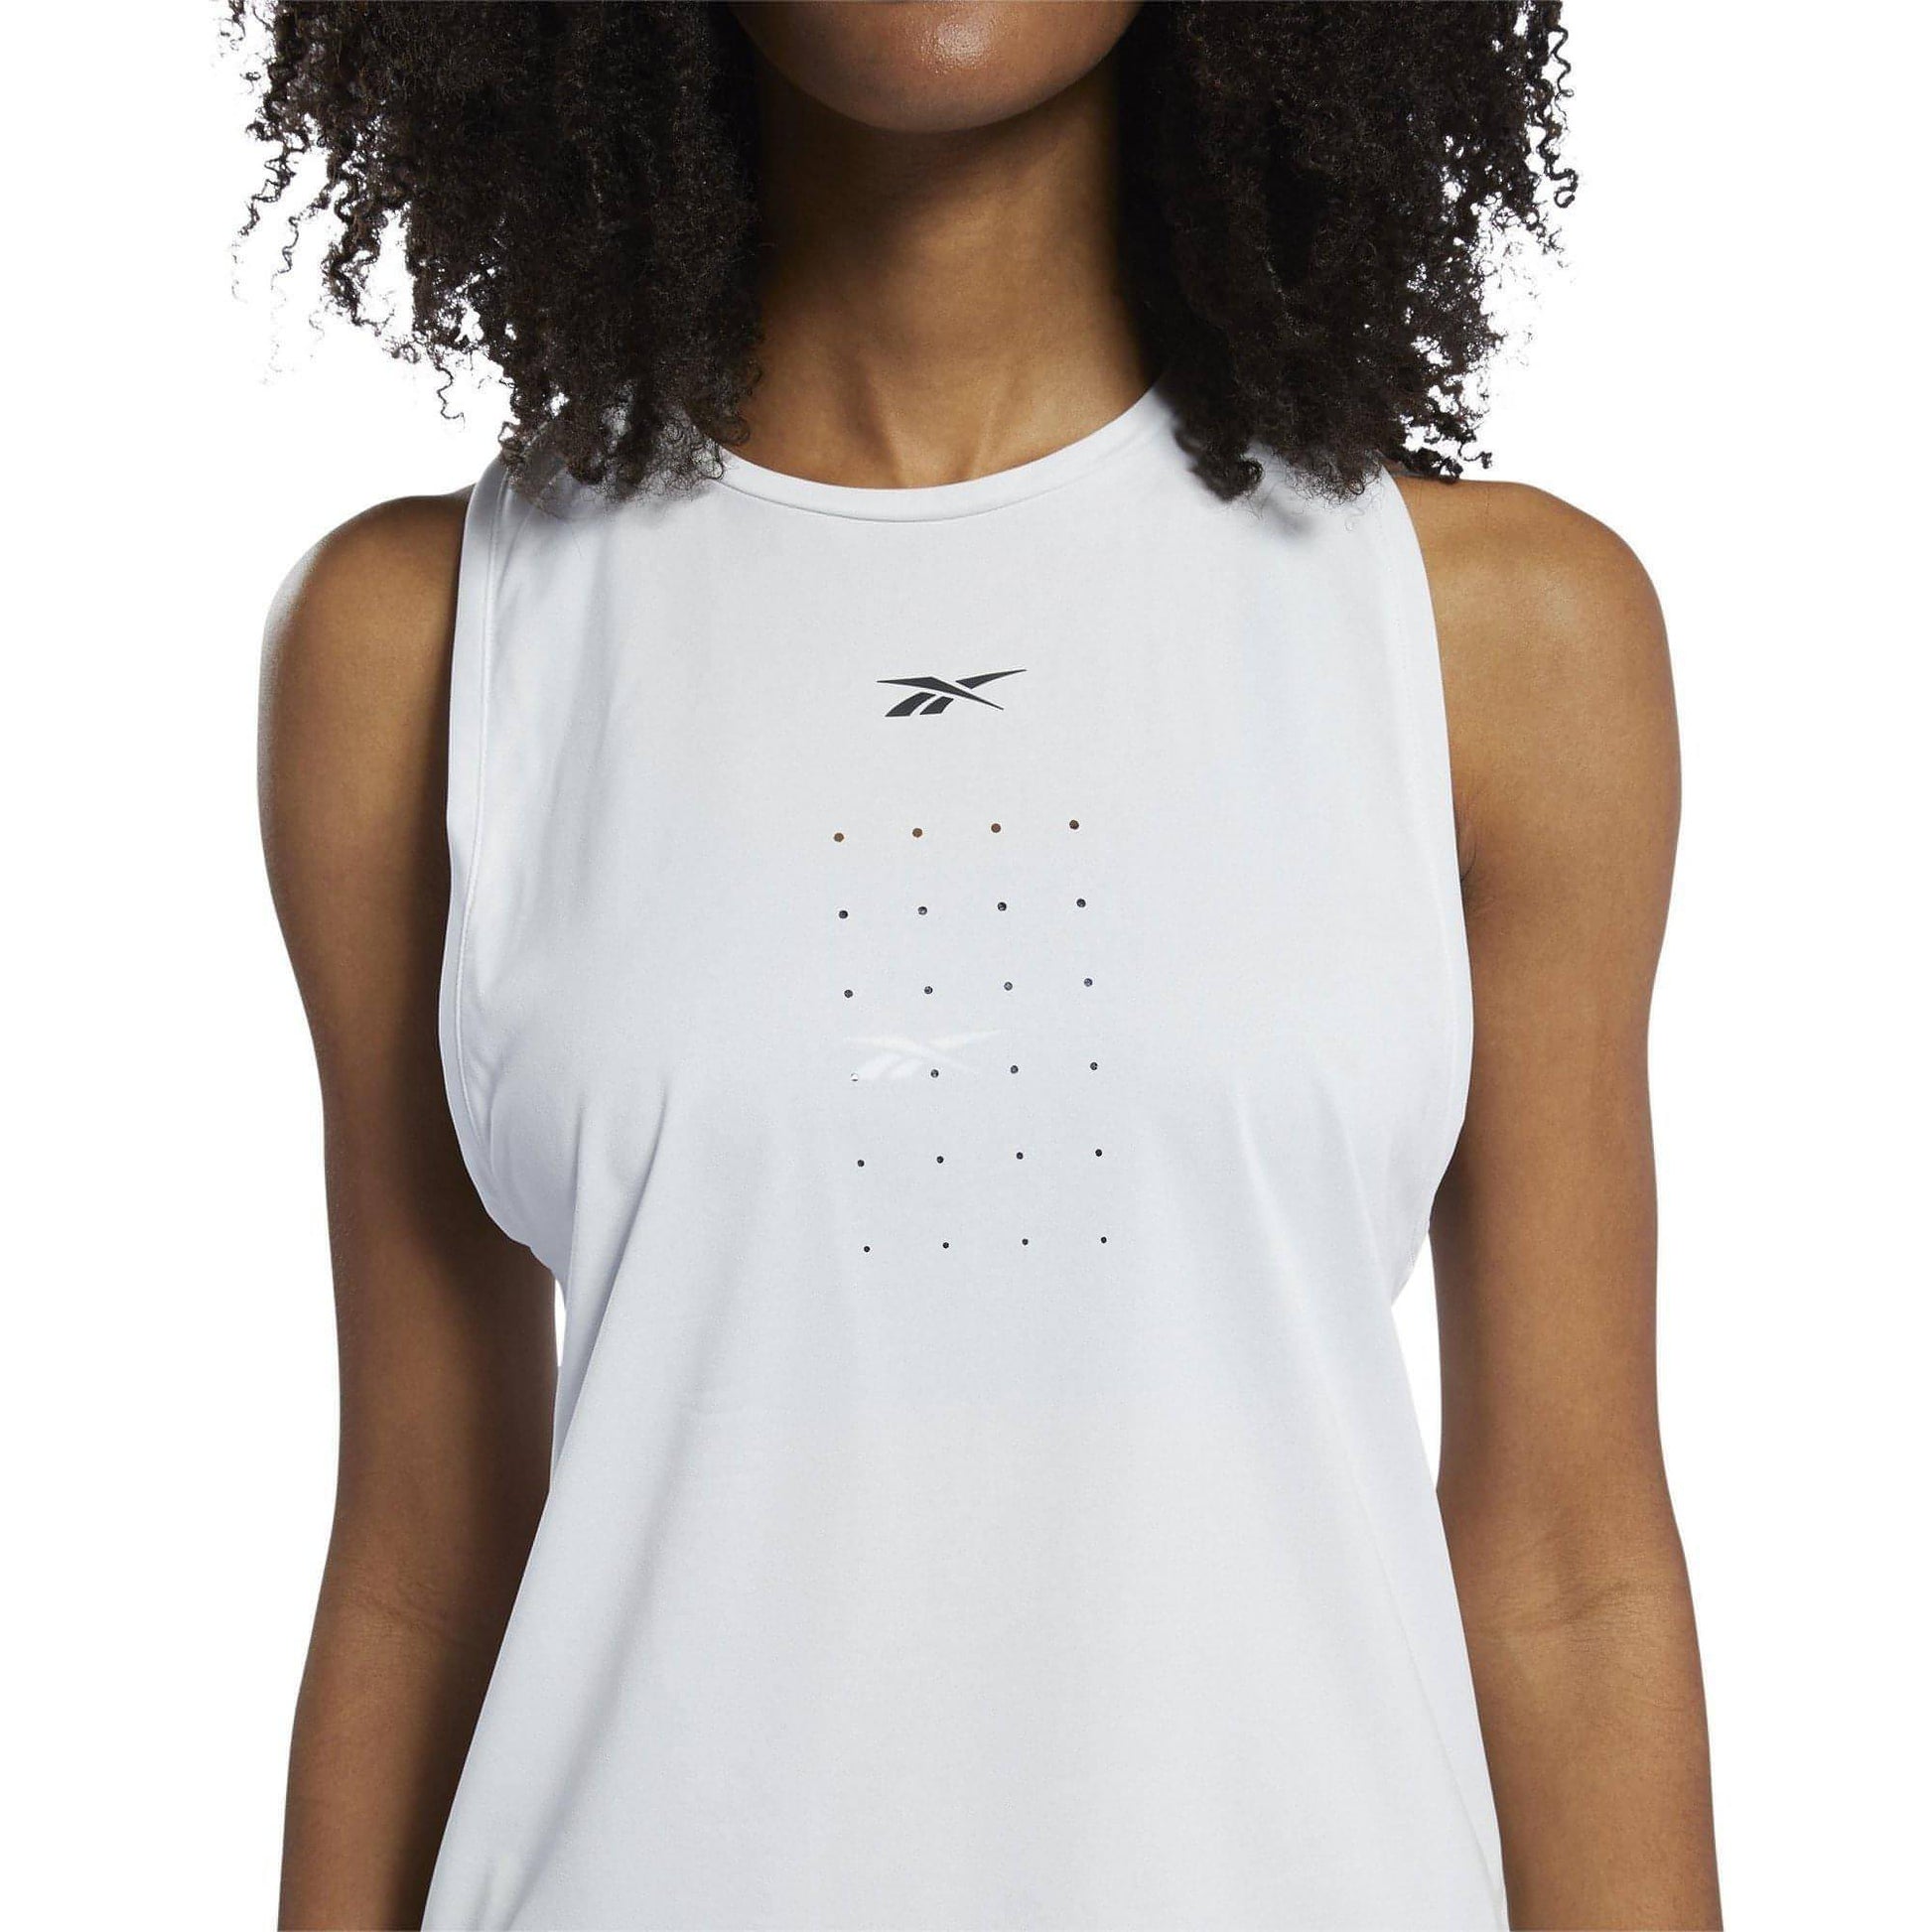 Reebok United By Fitness Perforated Womens Training Vest Tank Top - White - Start Fitness